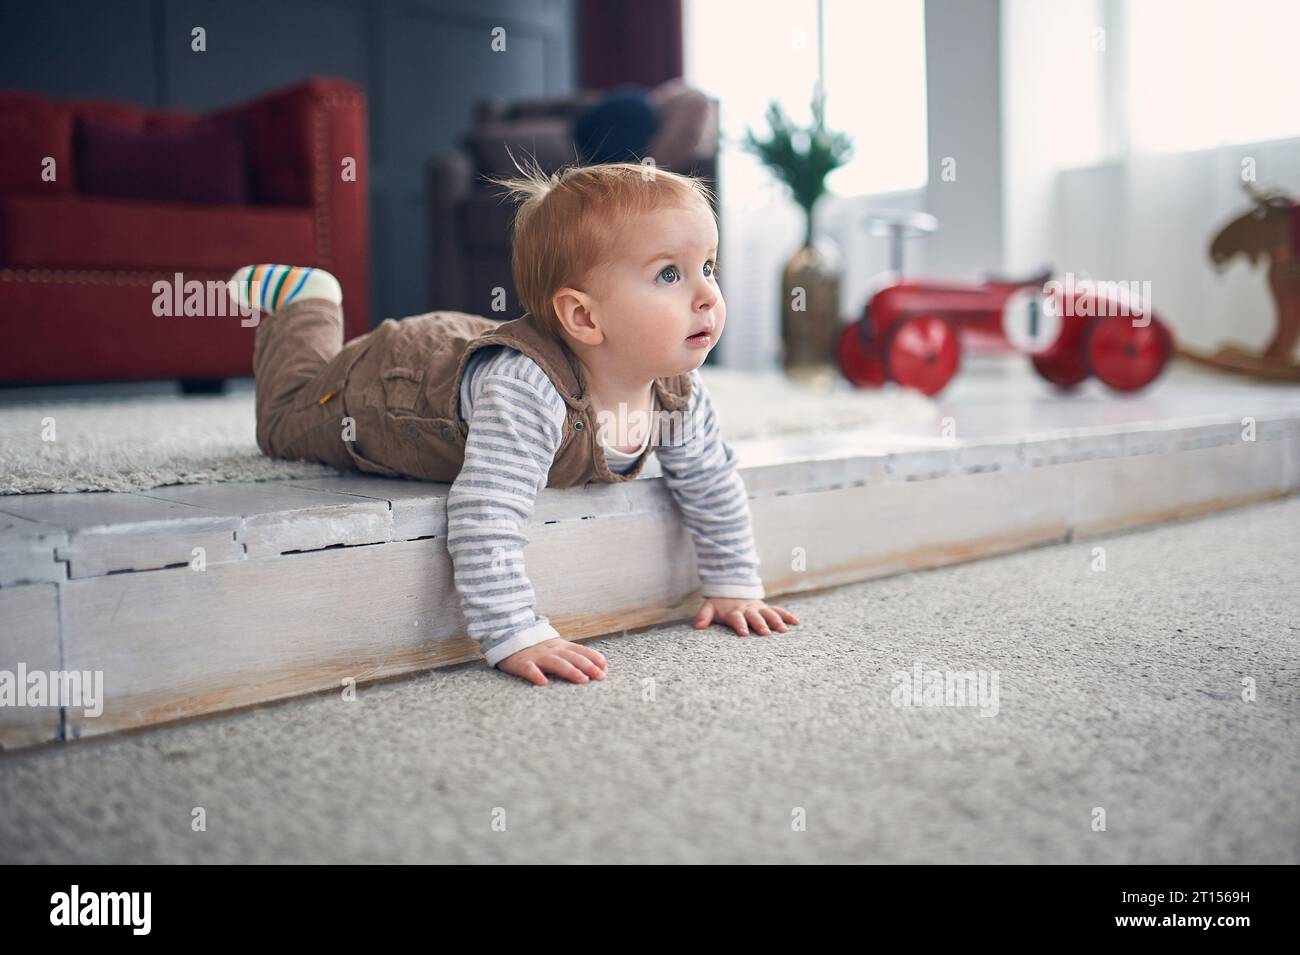 1 year old baby boy crawling on floor at home. christmas decorations on a background. Stock Photo